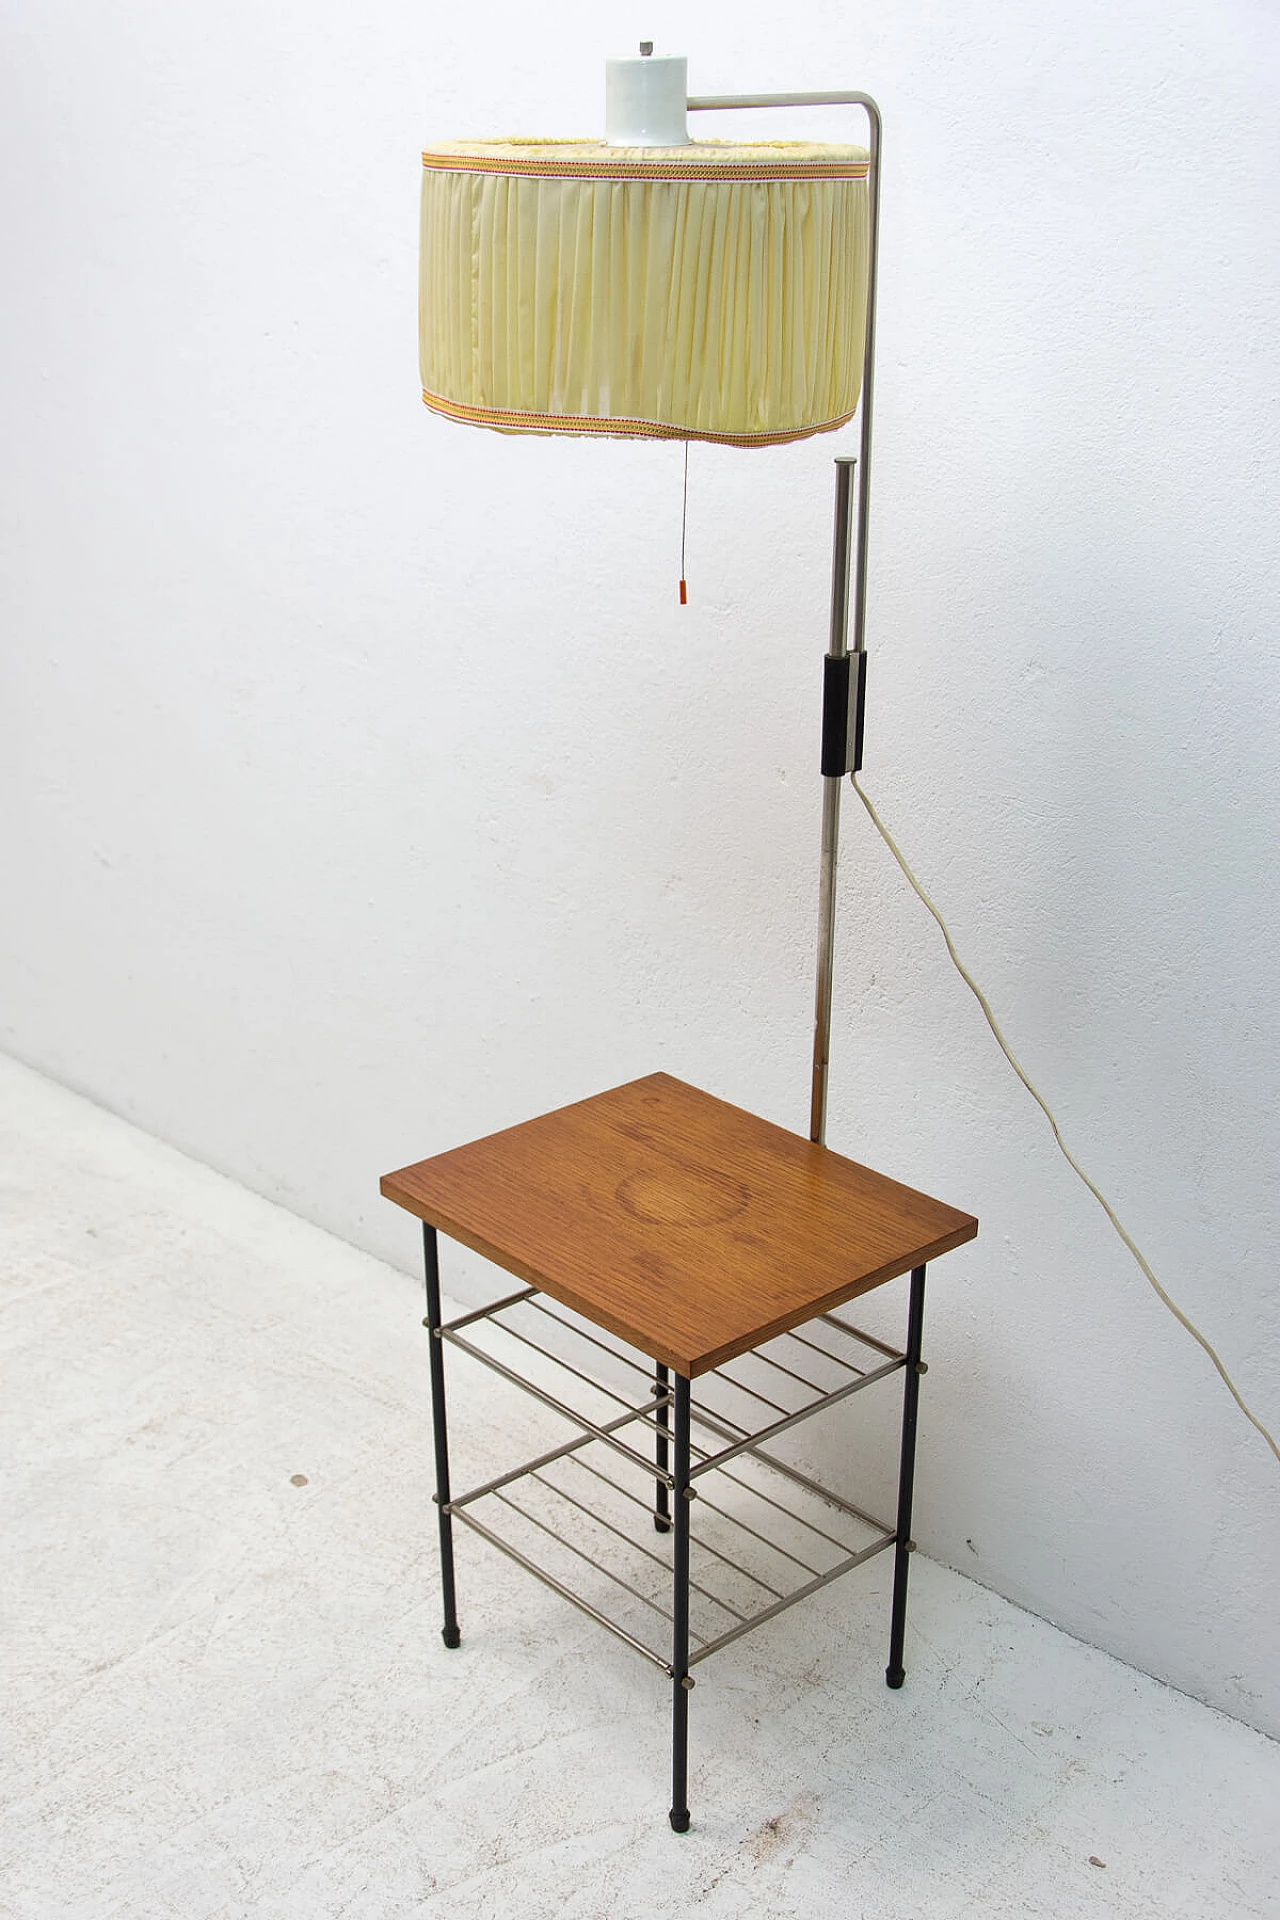 Floor lamp with storage compartment, 1970s 1364359